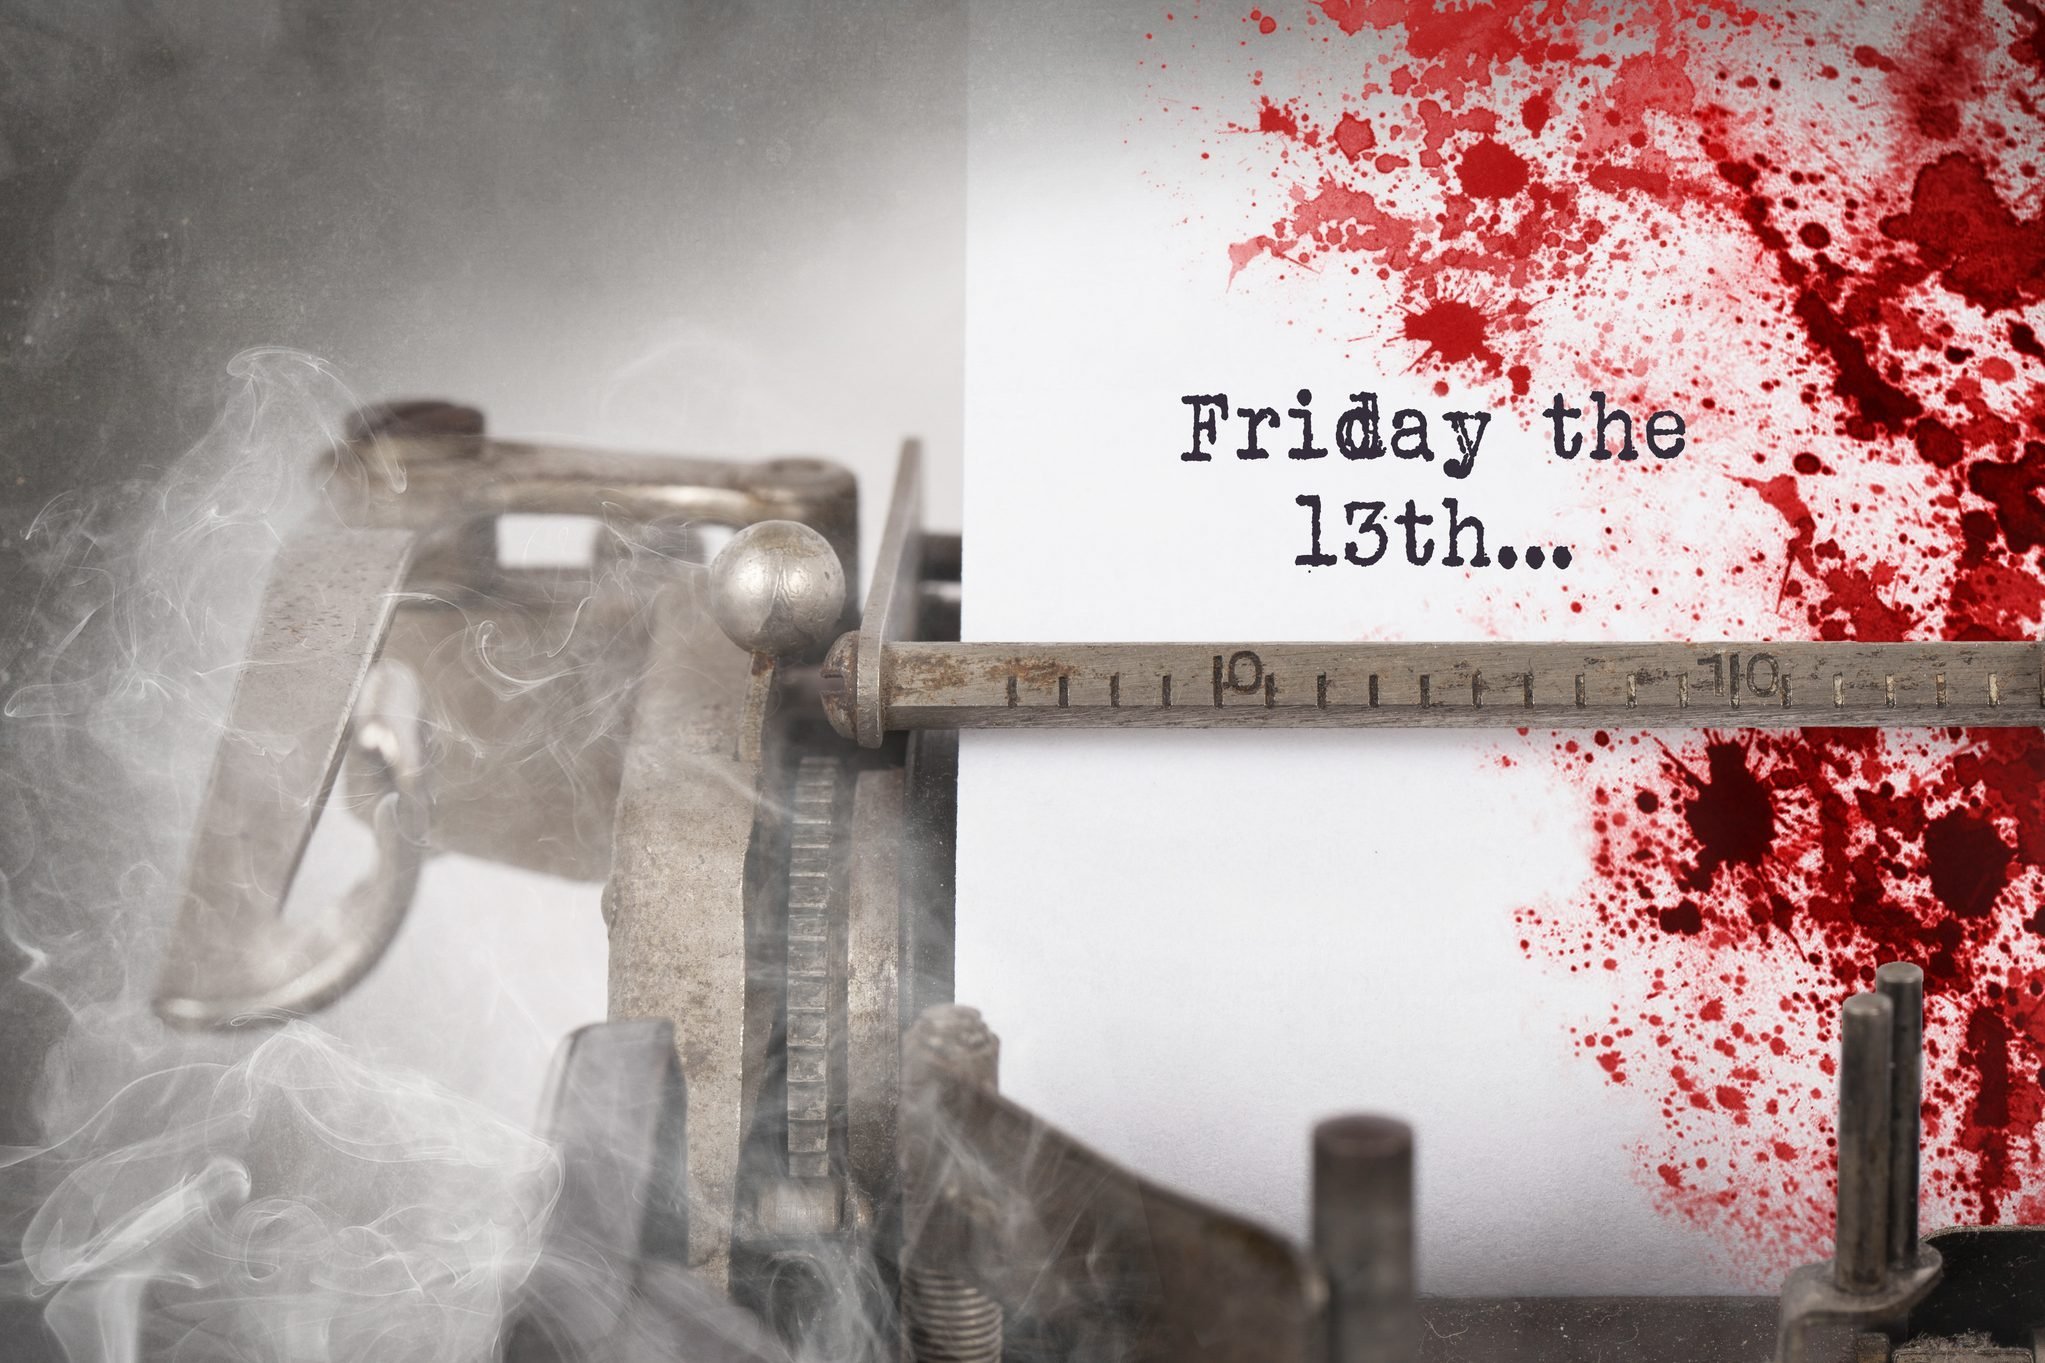 Bloody note on a typewriter that says "Friday the 13th..."